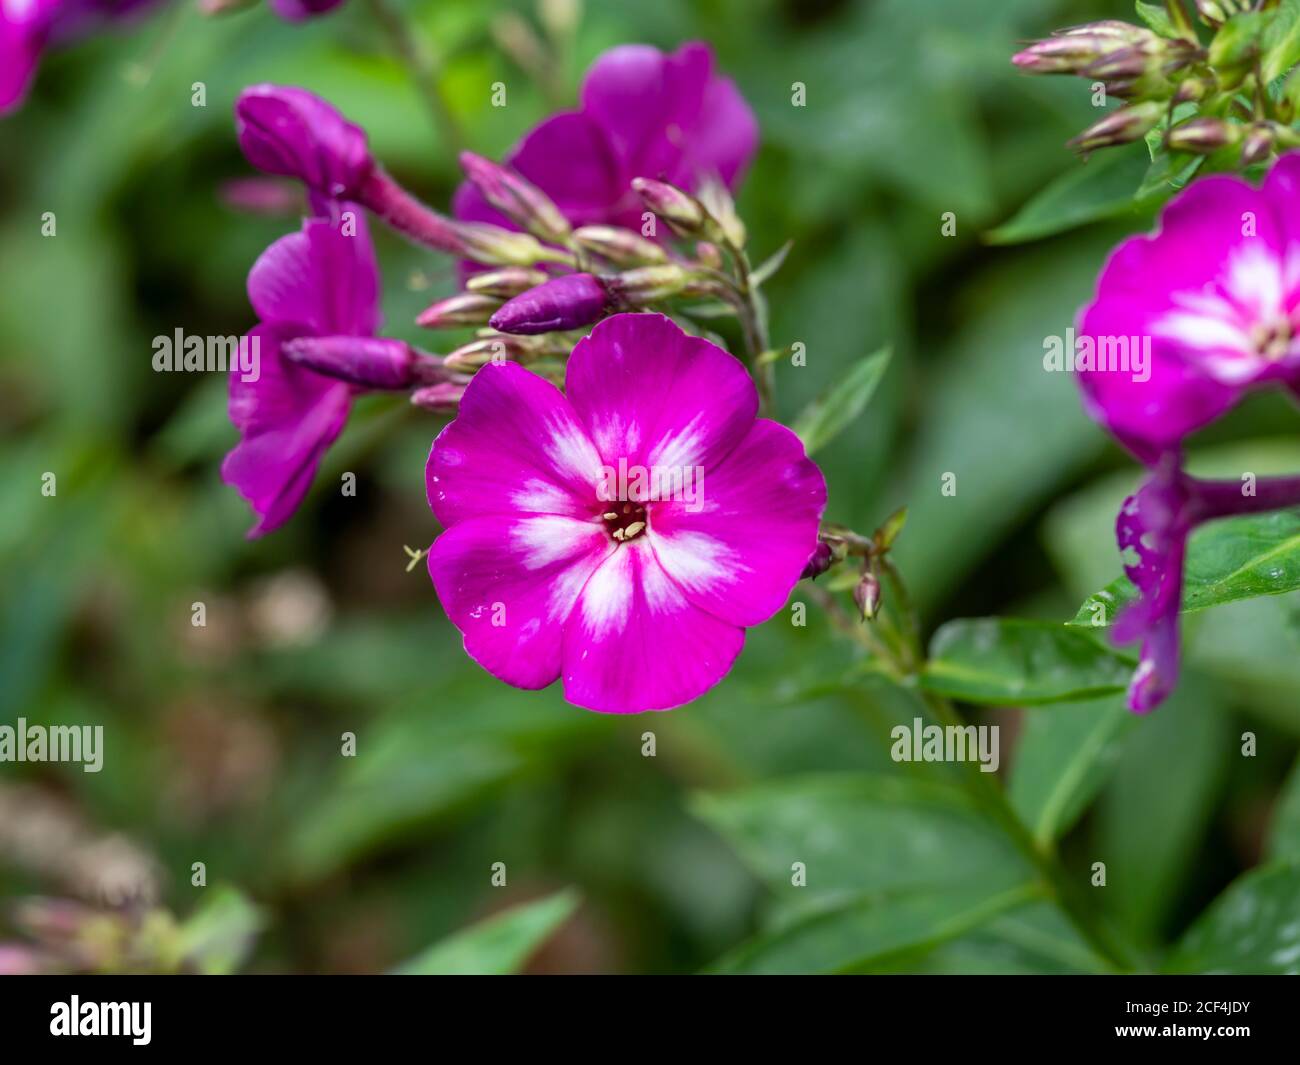 Closeup of the pretty pink flowers of Phlox paniculata, variety Velvet Flame, in a garden Stock Photo